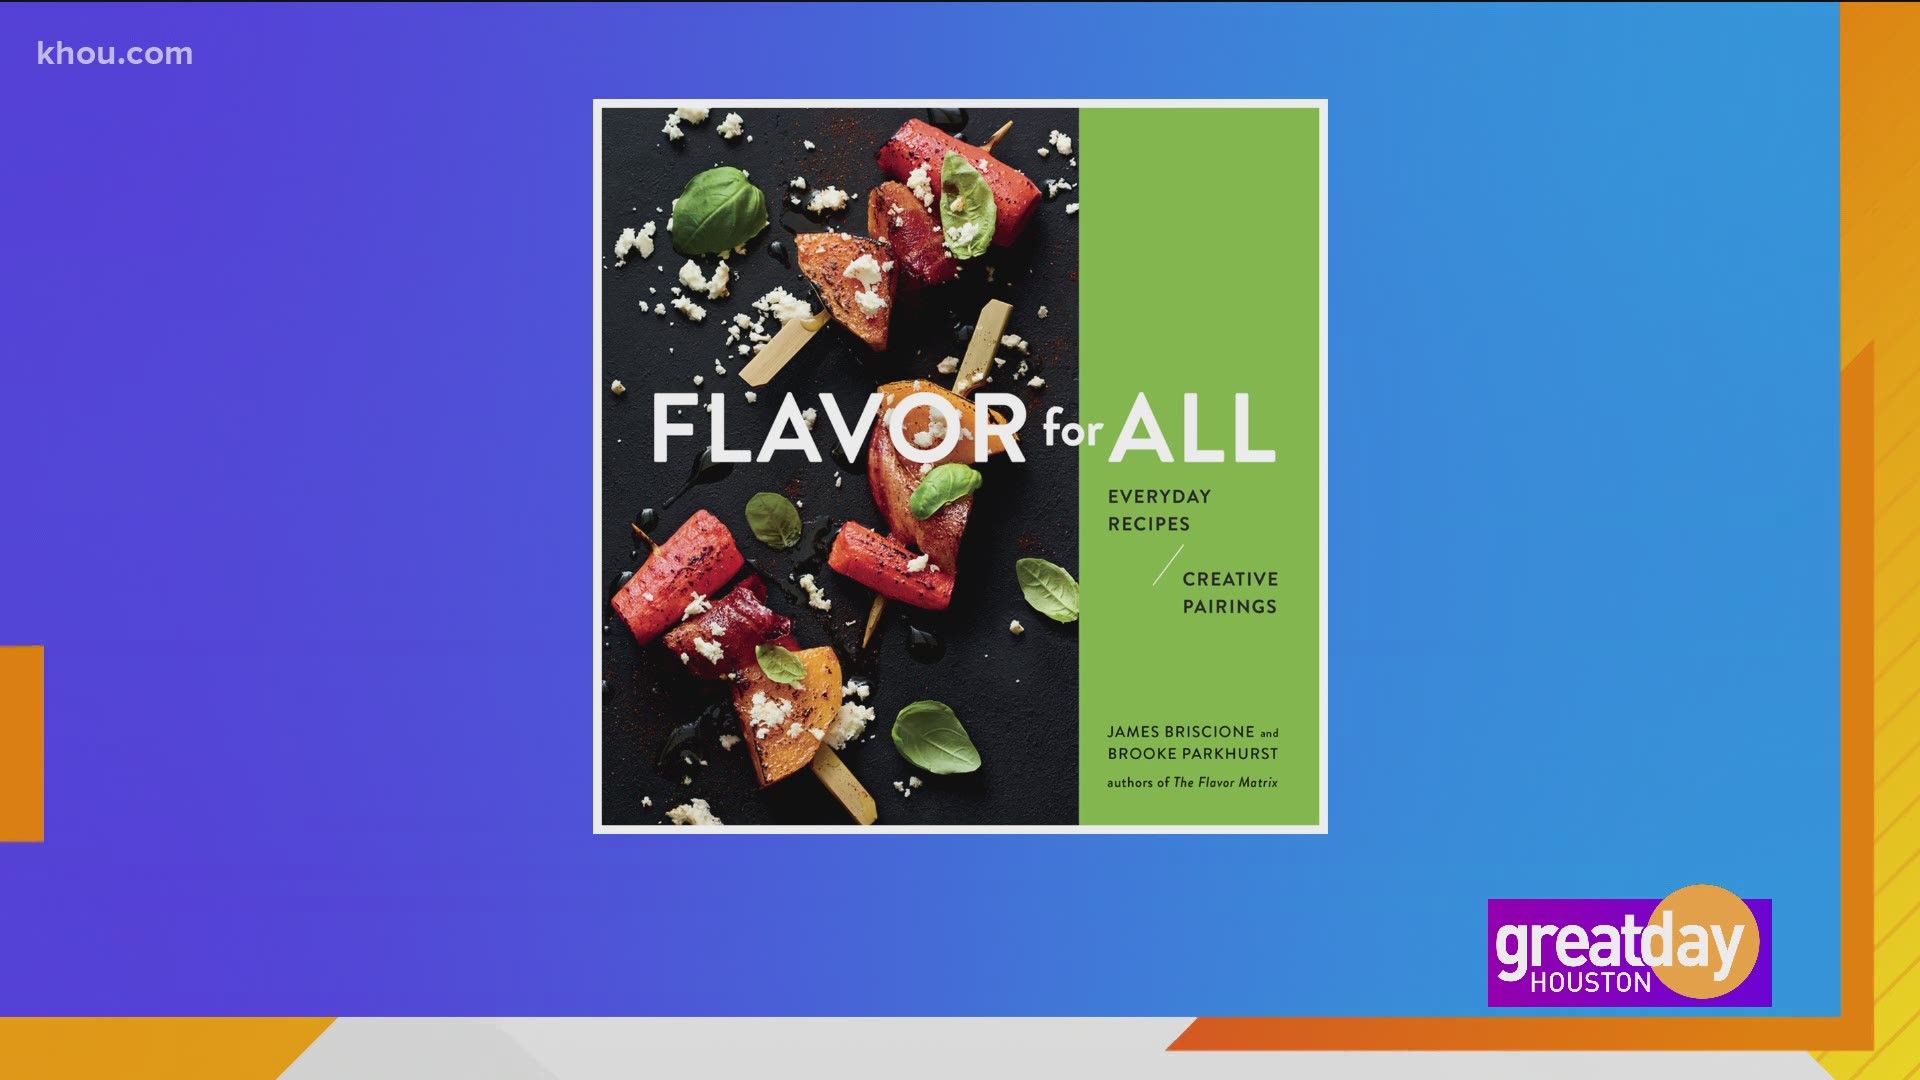 The Flavor for All cookbook features one hundred creative recipes that were designed to make an easy weeknight-ready meal for busy families.